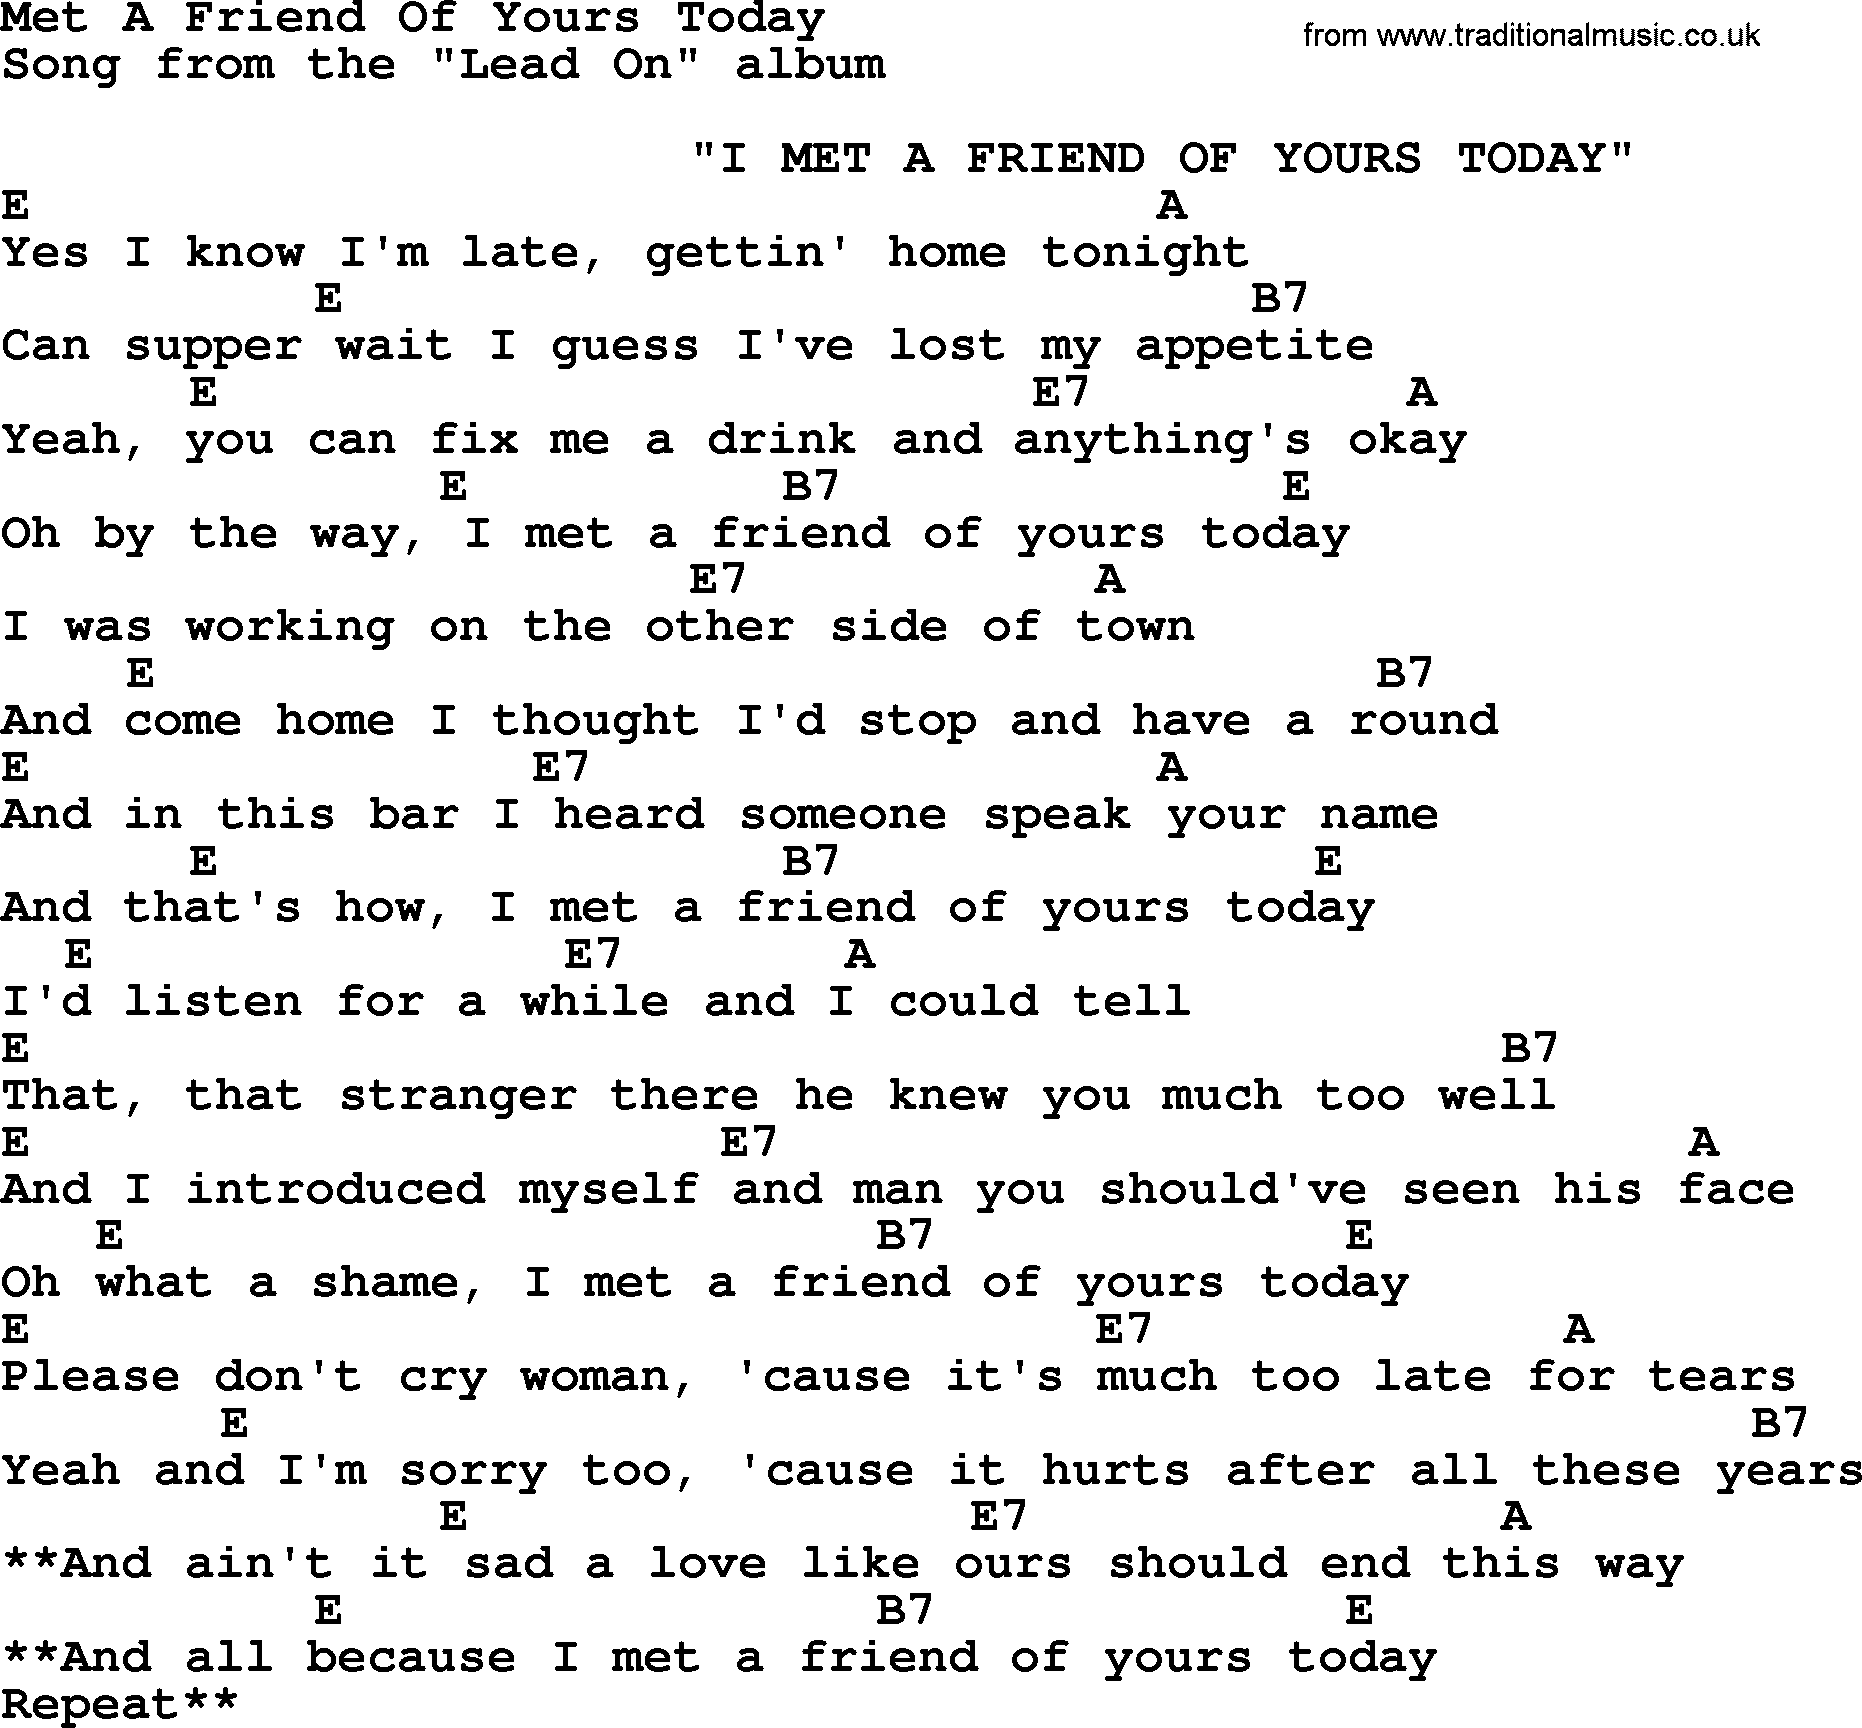 George Strait song: Met A Friend Of Yours Today, lyrics and chords